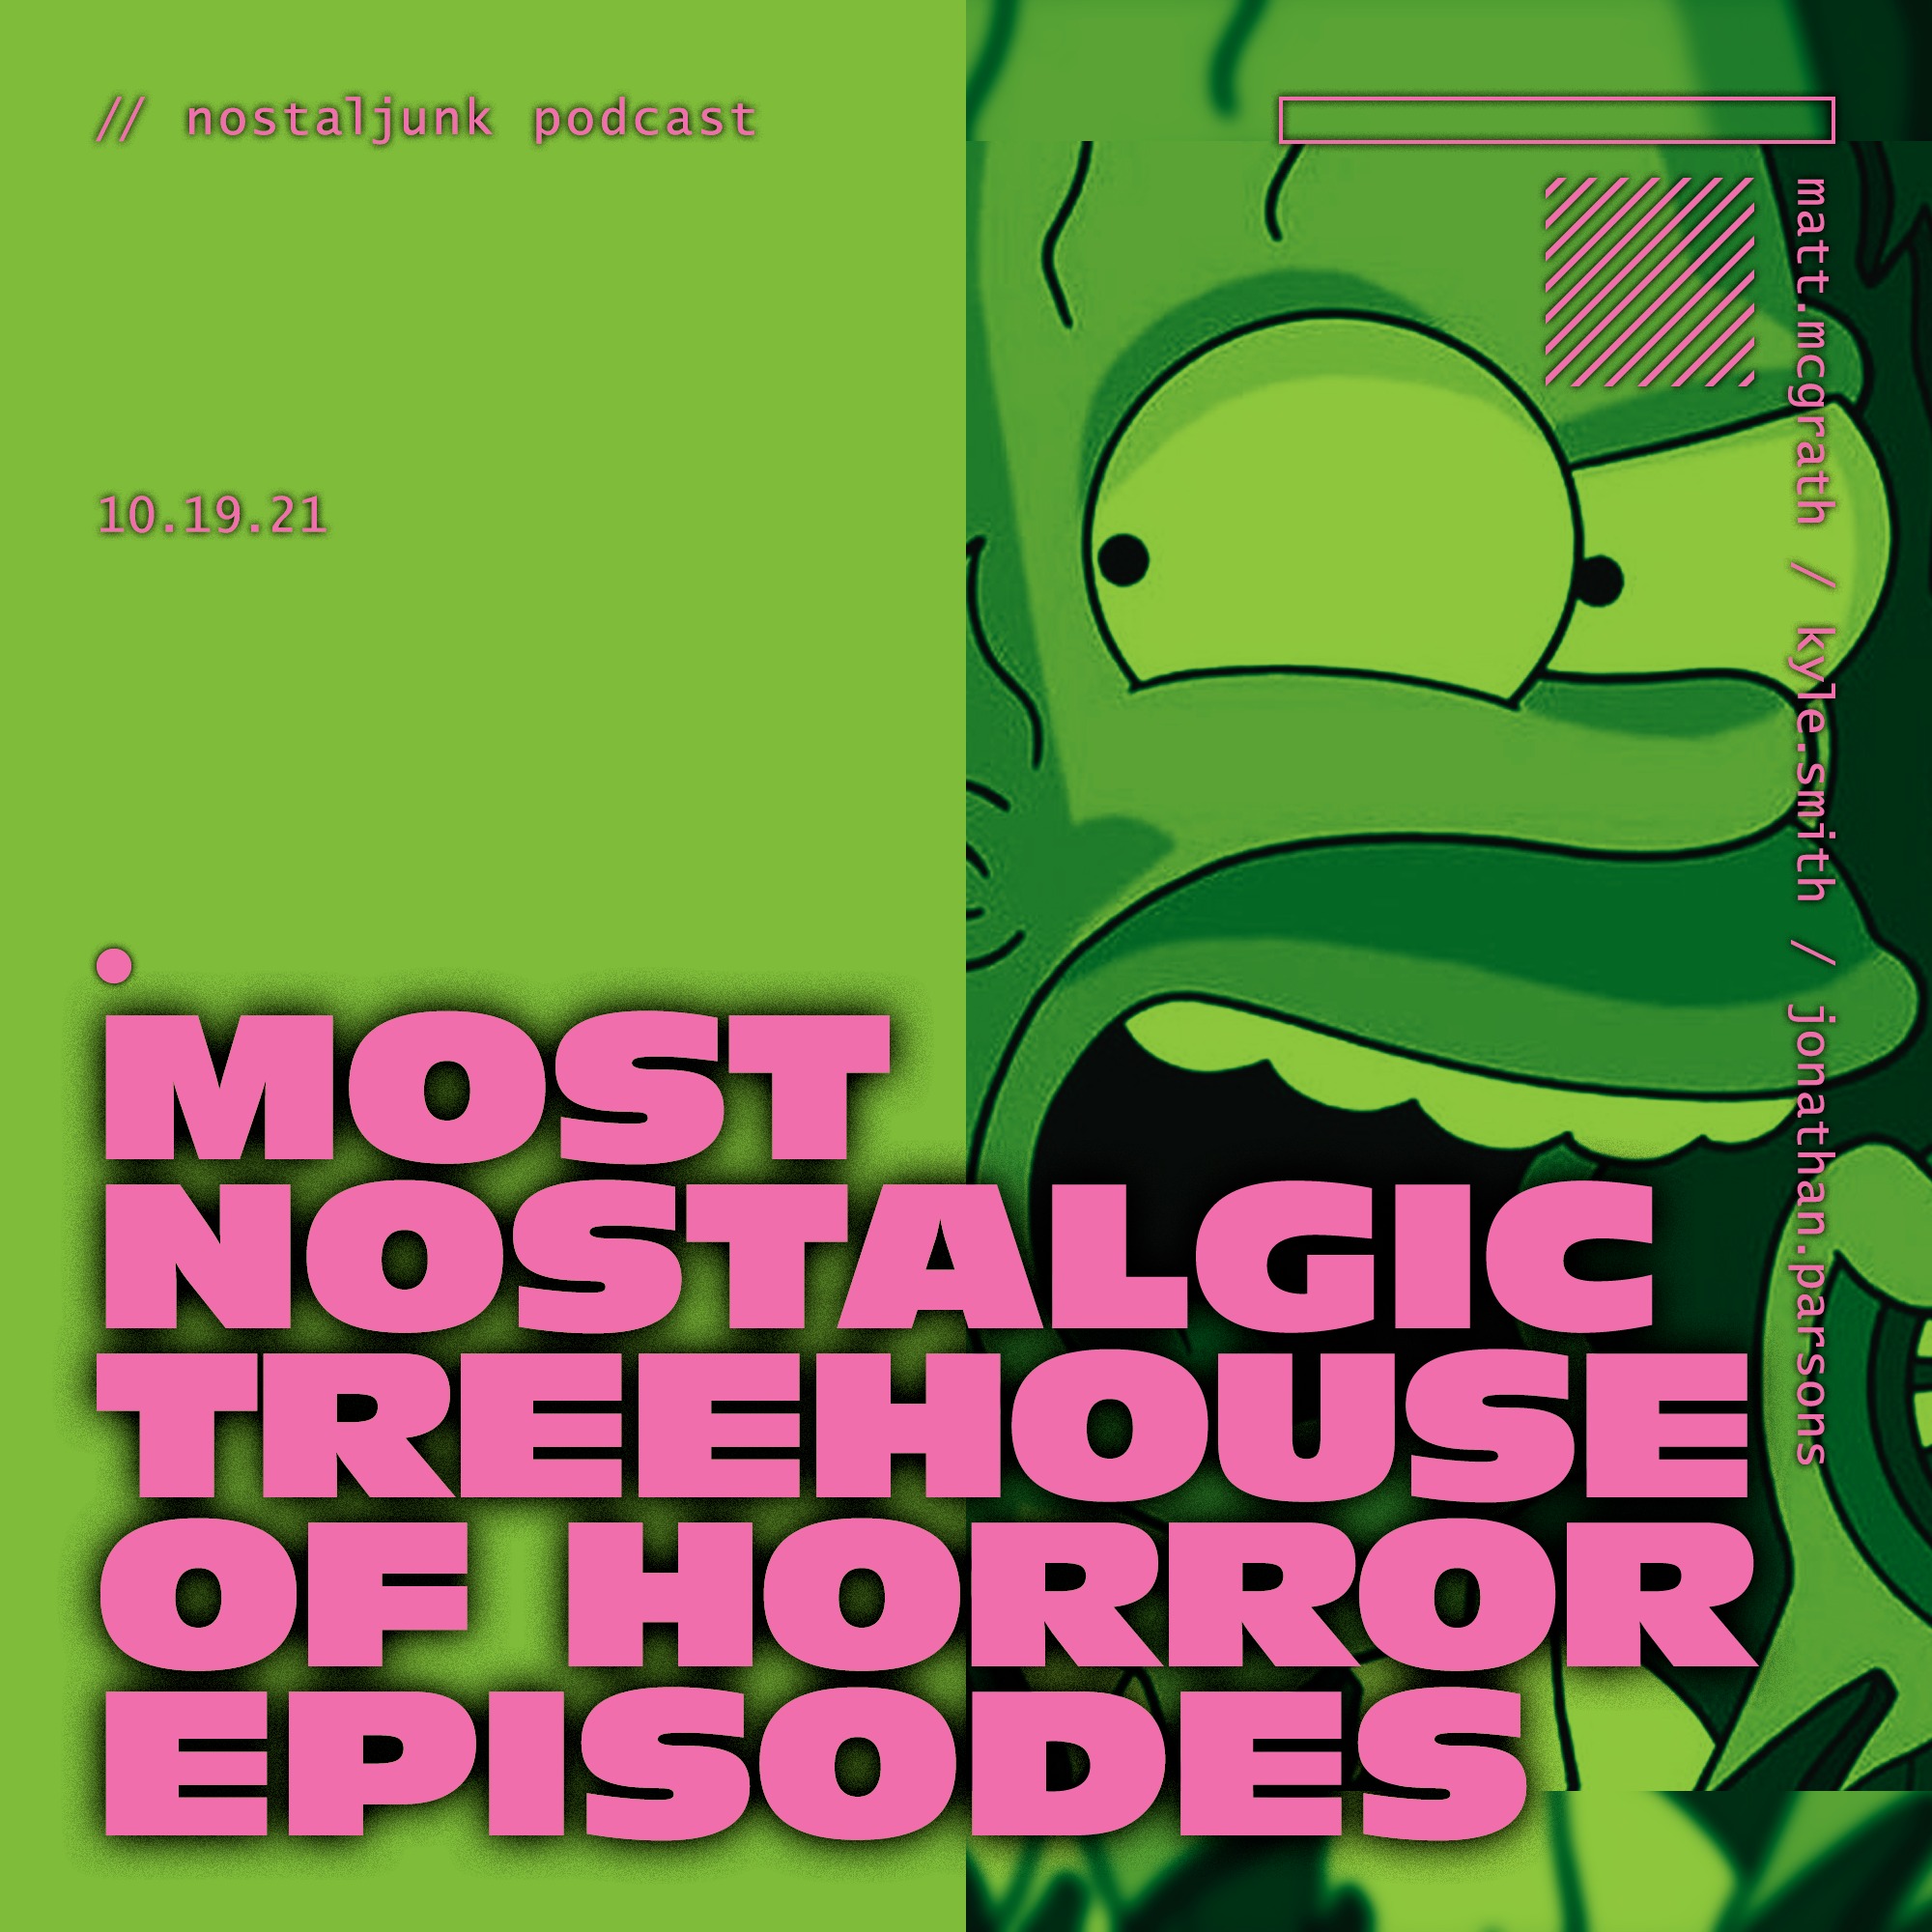 The Simpsons' "Treehouse of Horror" Episodes Image